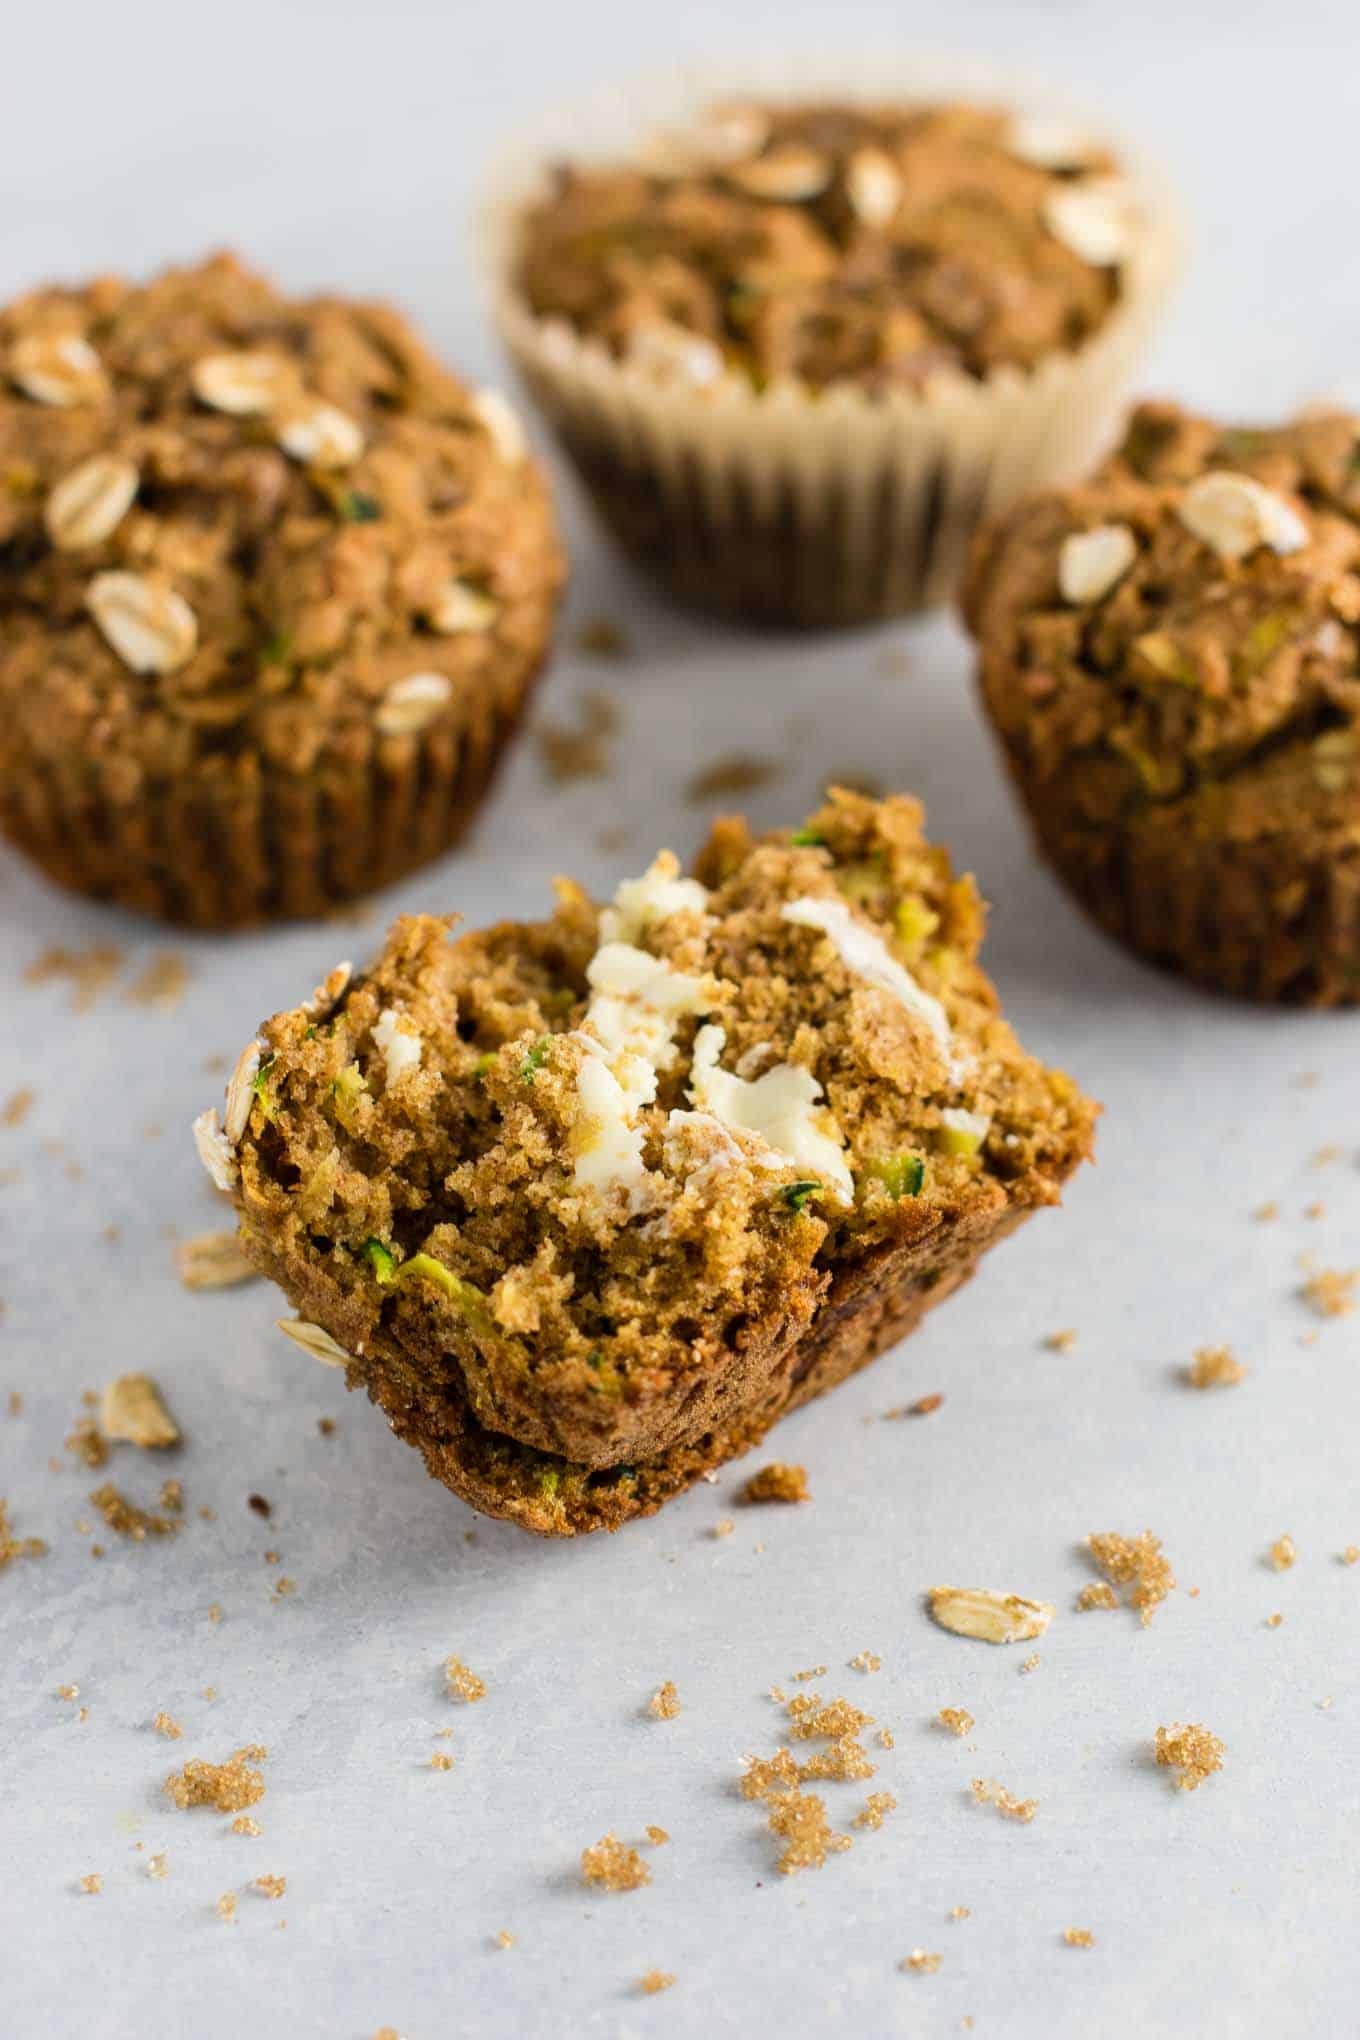 Brown Sugar Healthy Zucchini Bread Muffins recipe - melt in your mouth good! Perfect for using up all that zucchini! #zucchinibreadmuffins #healthy #healthymuffins #breakfast #vegetarian #healthybreakfast